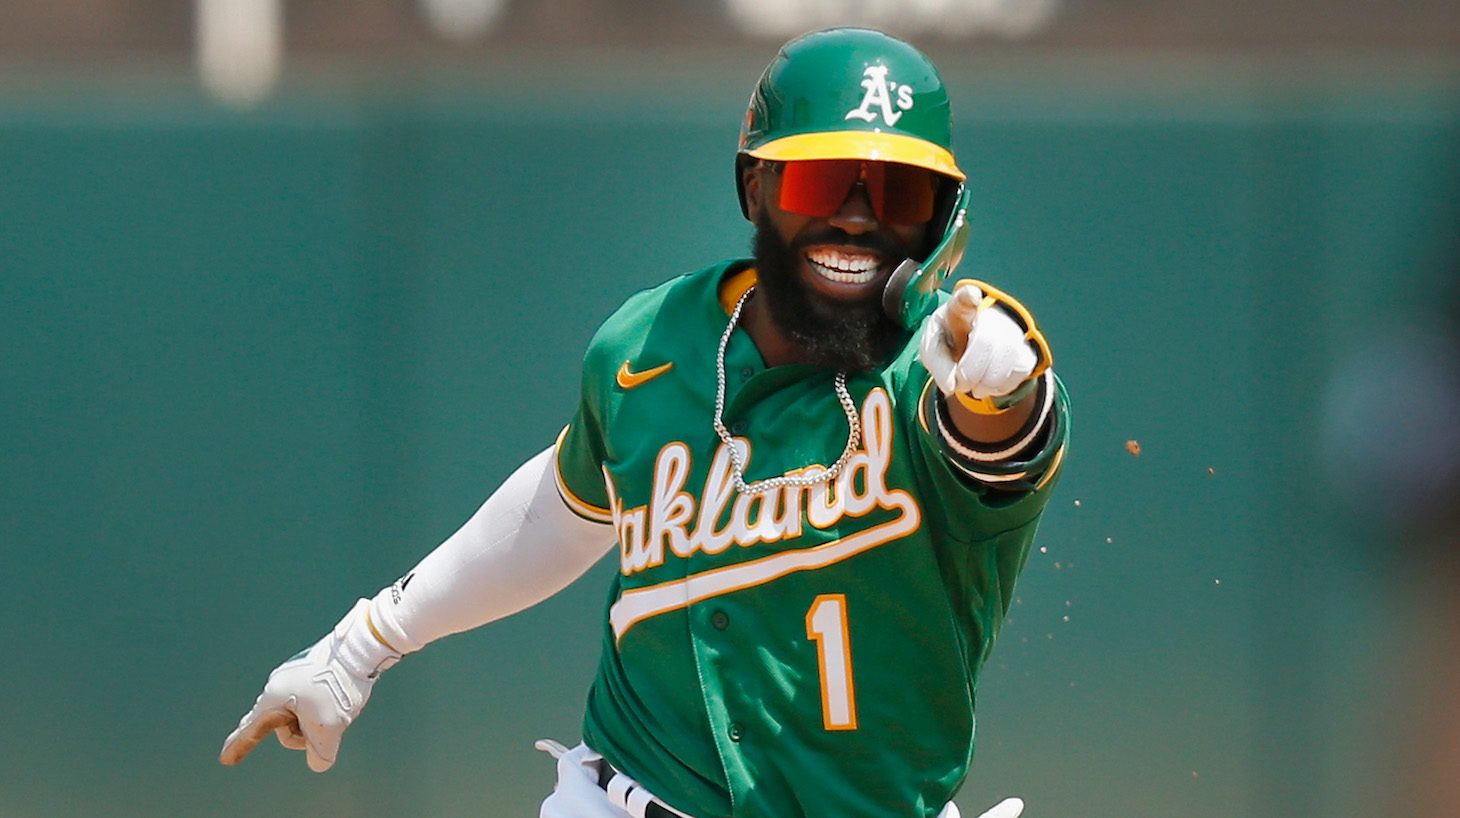 OAKLAND, CALIFORNIA - AUGUST 07: Josh Harrison #1 of the Oakland Athletics celebrates after hitting a two-run home run in the bottom of the fifth inning against the Texas Rangers at RingCentral Coliseum on August 07, 2021 in Oakland, California. (Photo by Lachlan Cunningham/Getty Images)